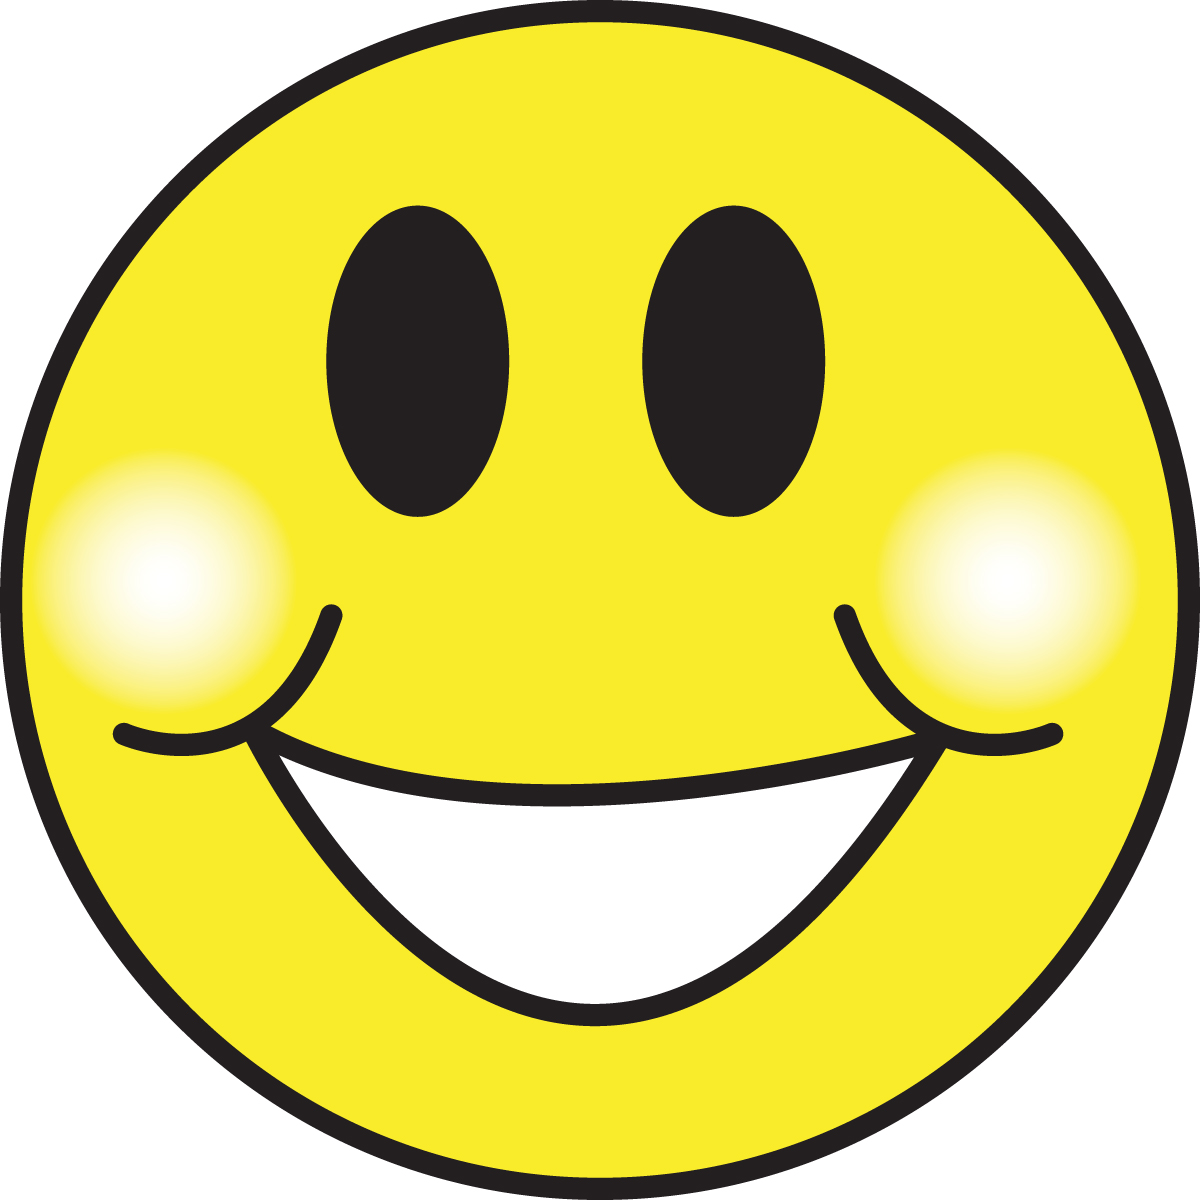 Happy face smiley face clip art emotions free clipart images 2